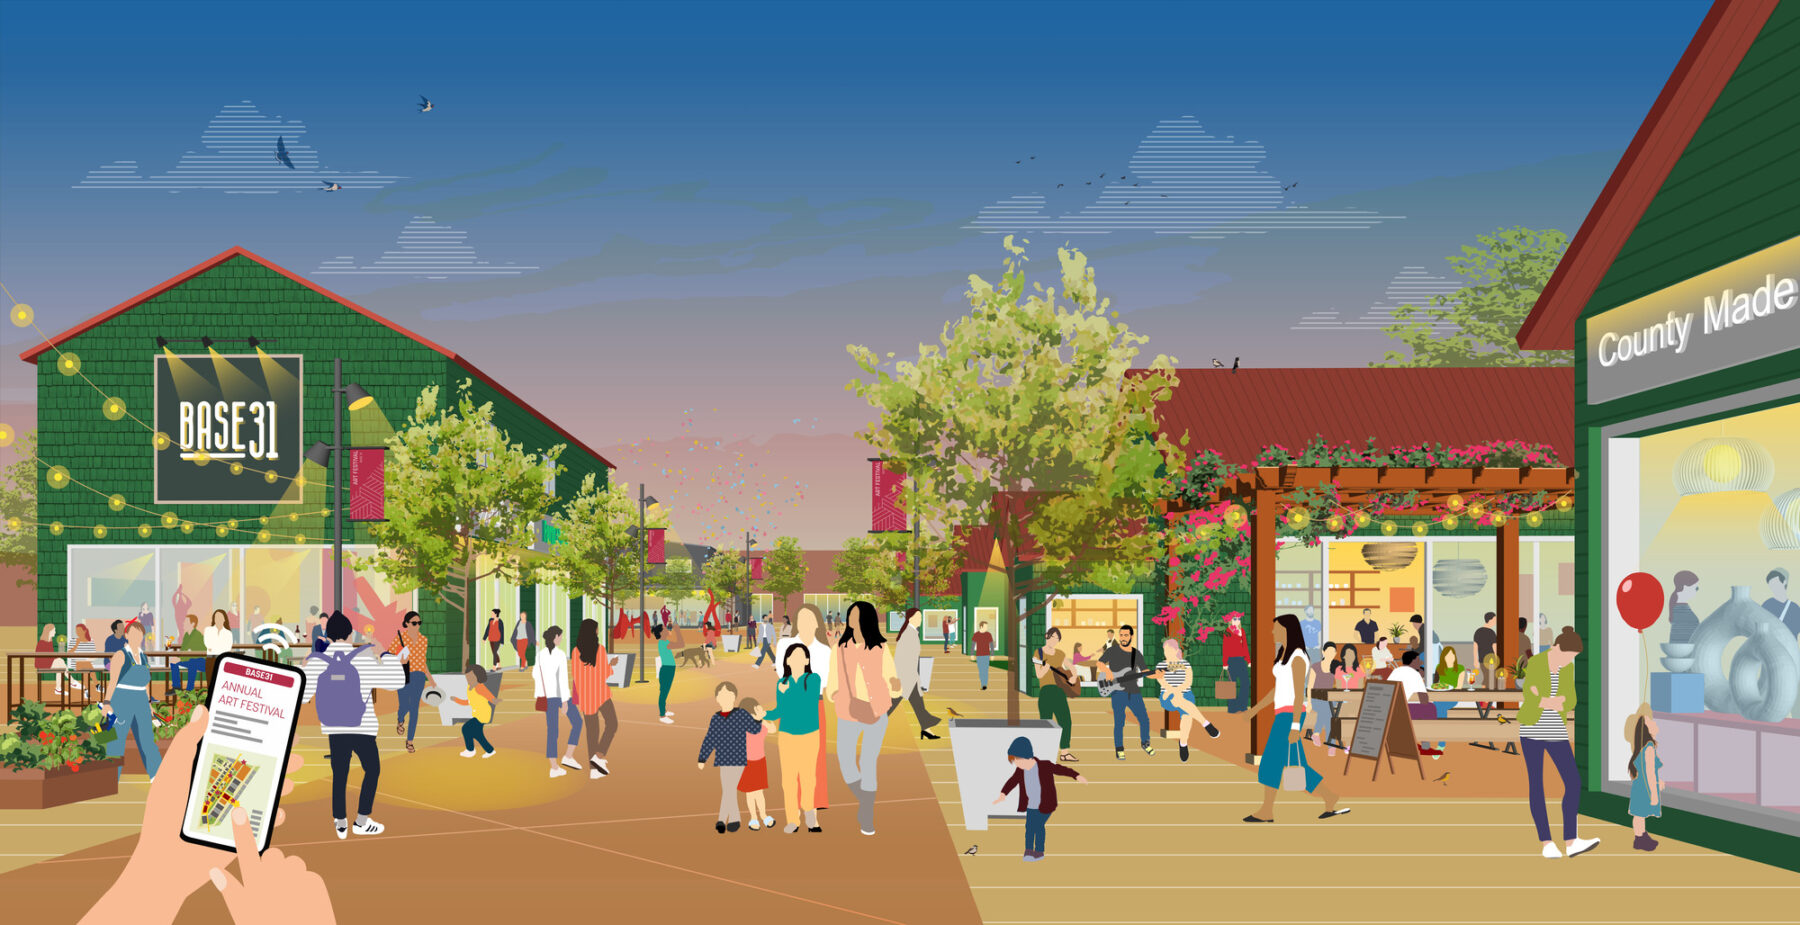 rendering of people walking through main street lined with restaurants and plantings